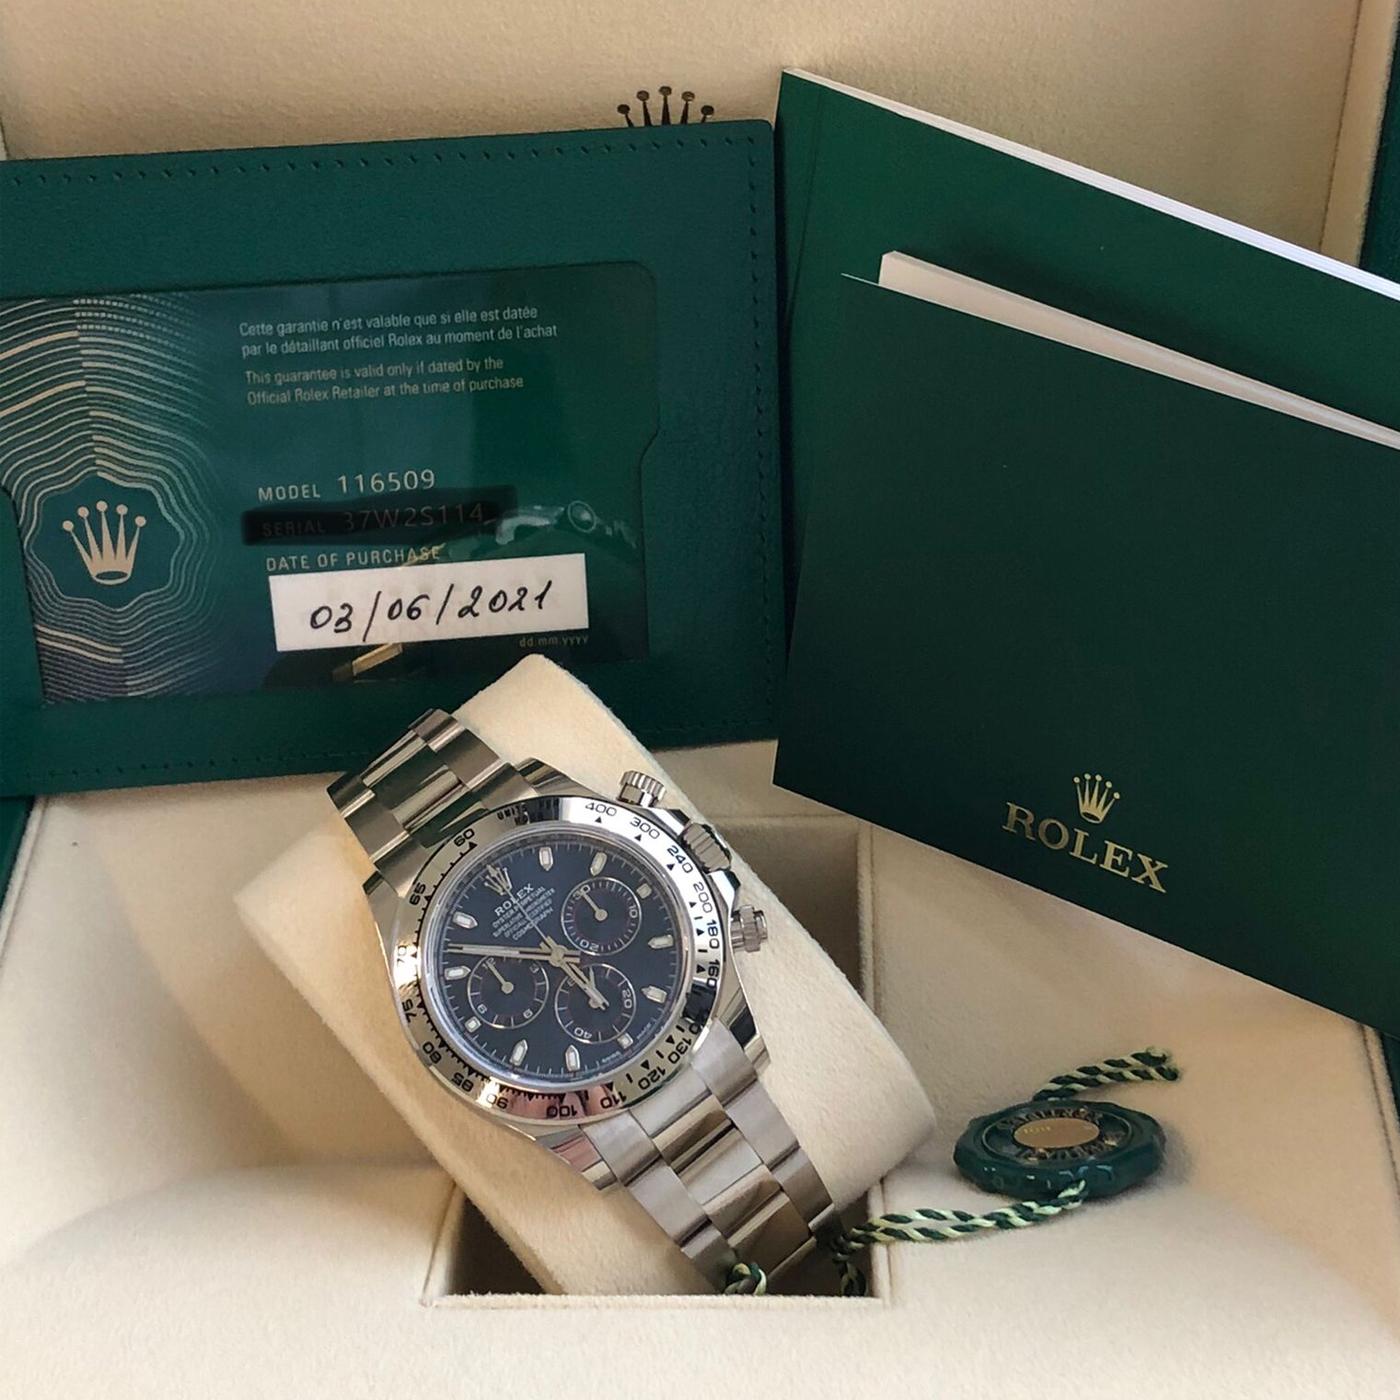 Rolex Daytona Oyster Perpetual Cosmograph 18k White Gold Blue Dial 116509 4